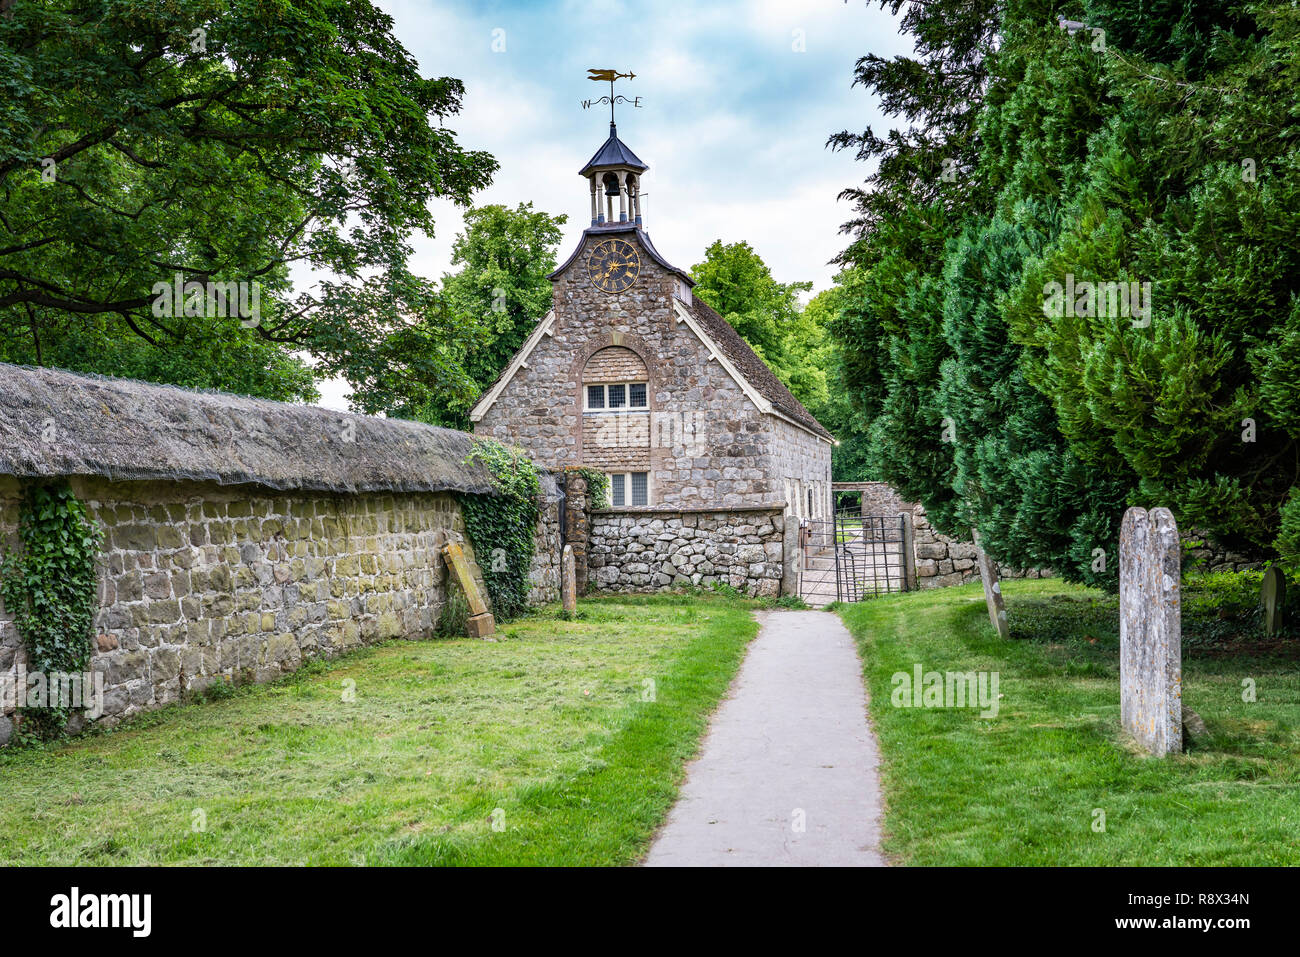 An historic stone church and thatched wall in the village of Avebury, Wiltshire, England, Europe. Stock Photo